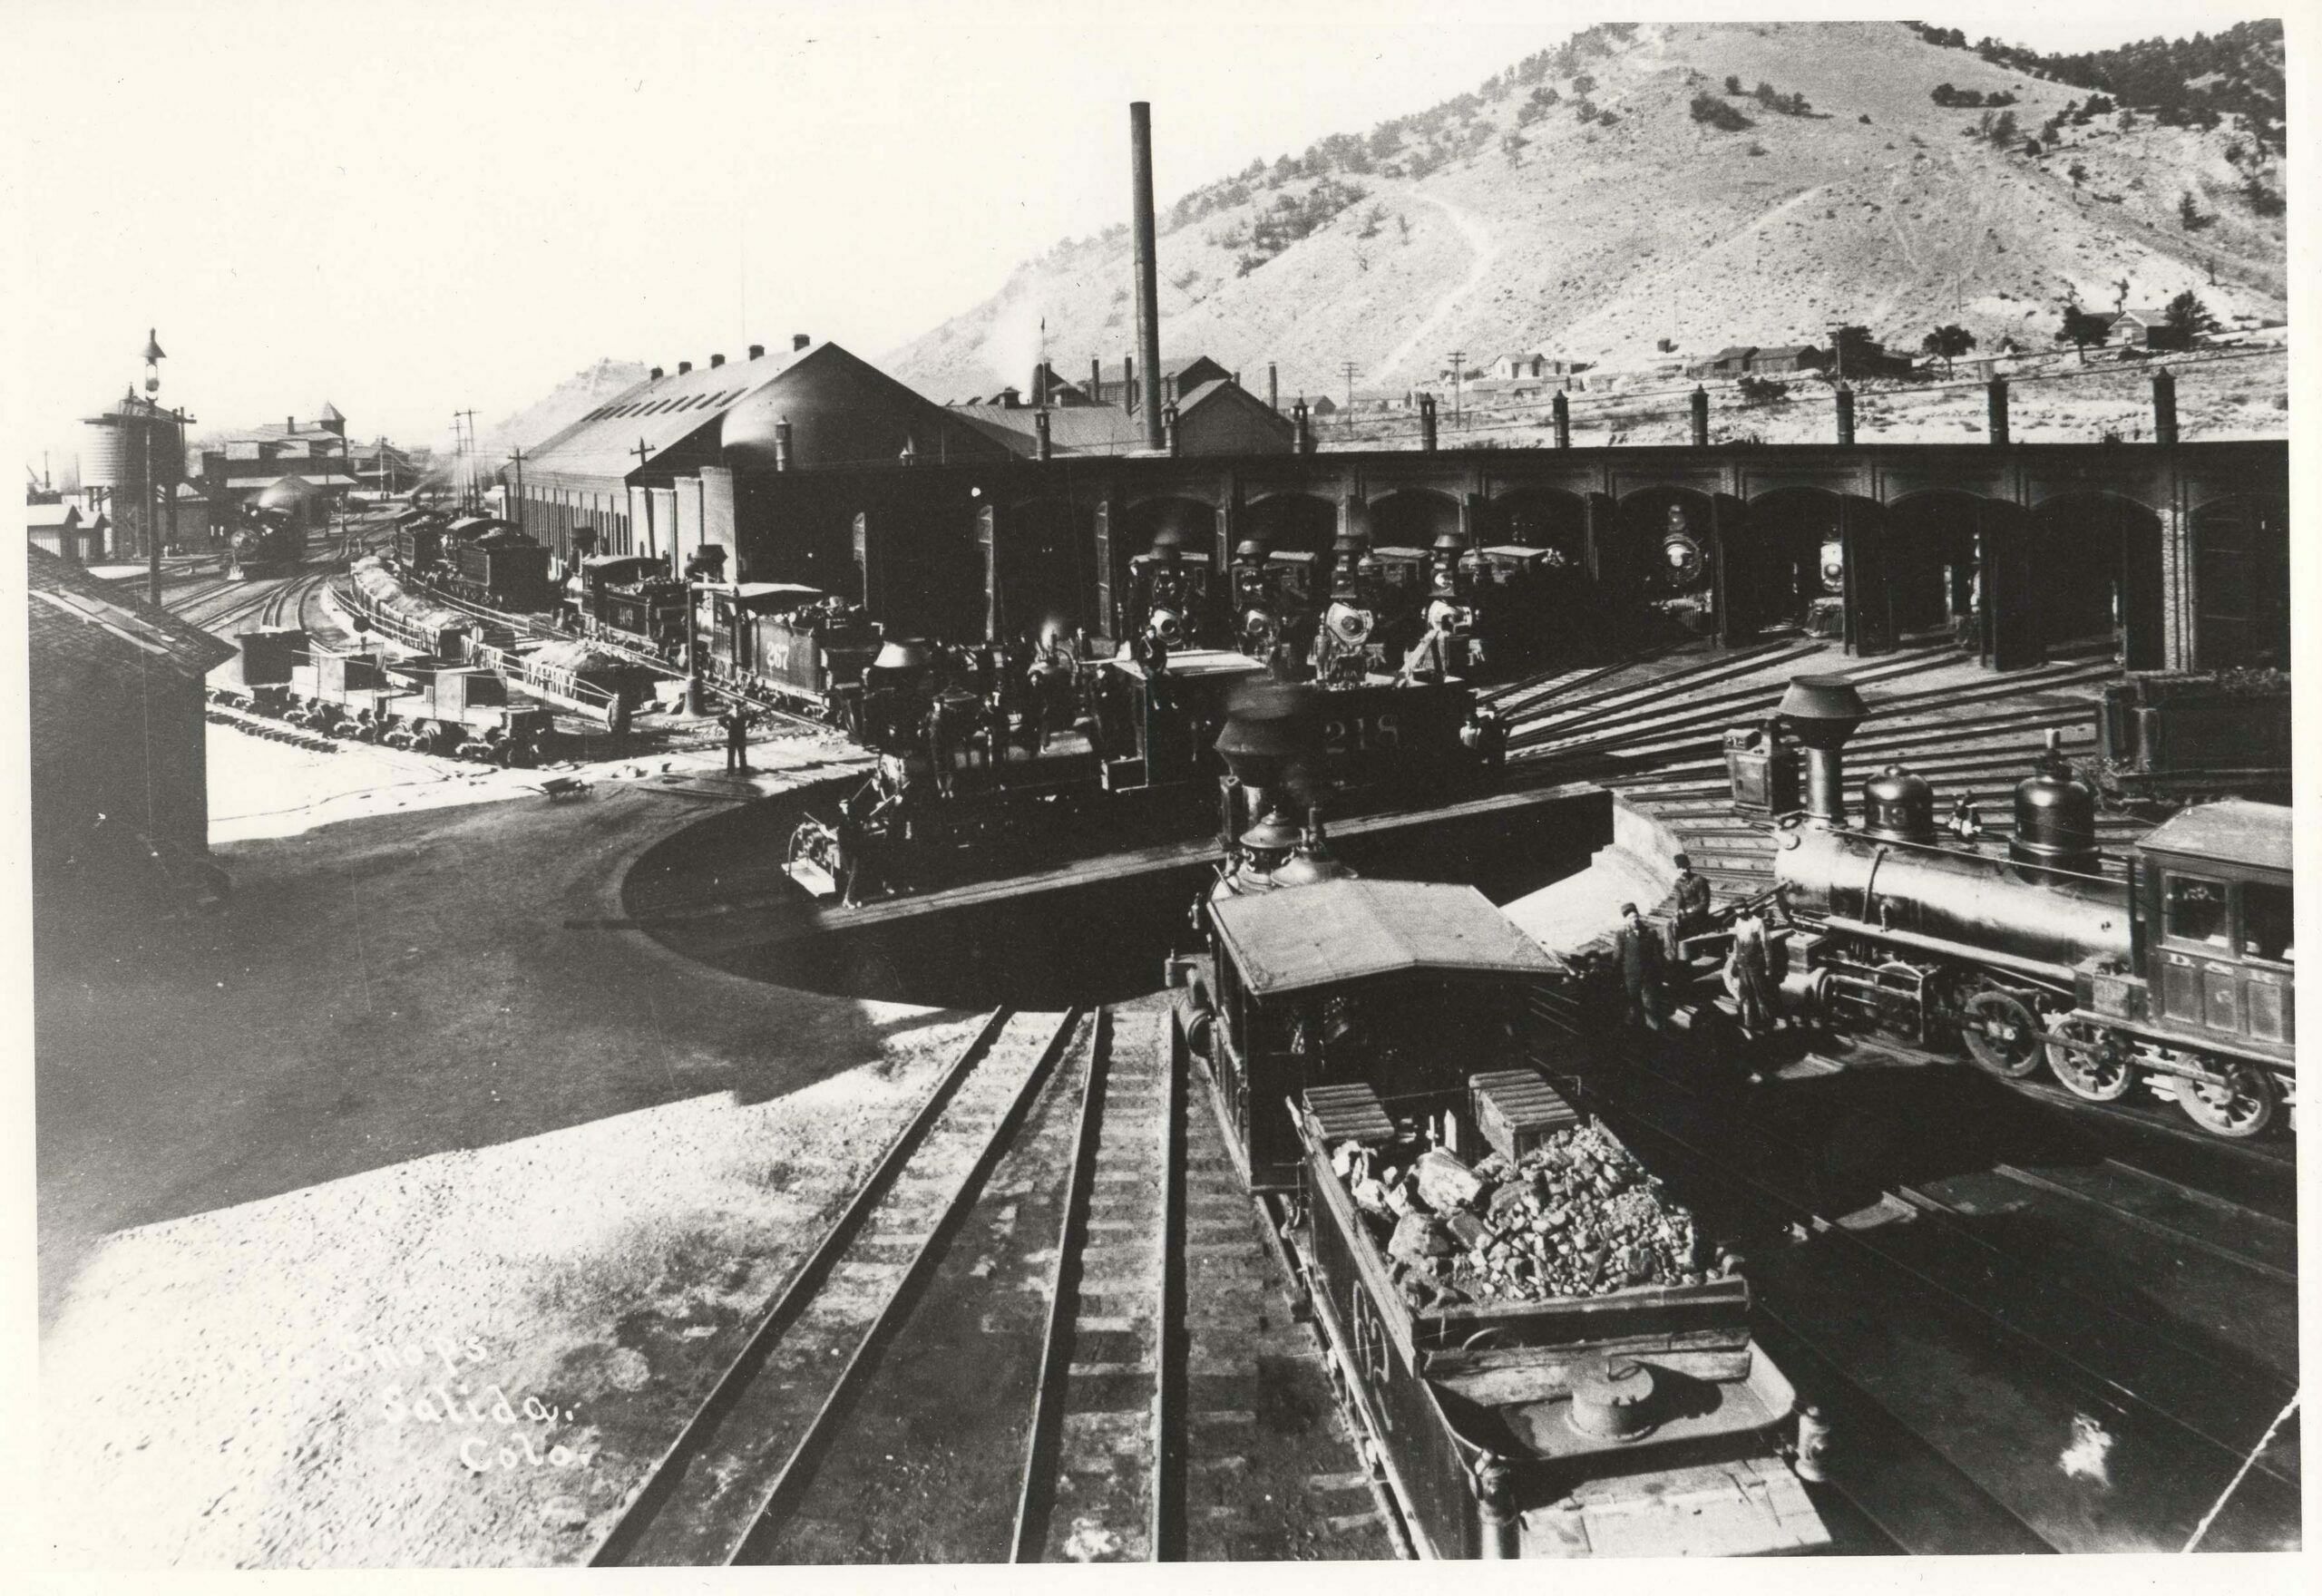 All 27 roundhouse tracks and nearly half of the Salida roundhouse itself, are visible in this photograph, taken sometime between 1890 and 1892. Nearly half of the stalls carry four rails to handle both gauges. The 62-foot turntable was used until 1909, when it was replaced with an 80-foot model. Moving counter-clockwise from the roundhouse lead nearest the photographer, the following locomotives are visible: •    narrow-gauge Engine 62, a Baldwin Class 56 2-8-0 (notice the irregular size of coal in its tender) •    narrow-gauge Grant Class 60 (C-16) 2-8-0, No.213 •    a narrow-gauge tender from a Class 60 locomotive •    an unidentifiable narrow-gauge locomotive •    two unidentifiable standard-gauge engines •    an unidentifiable narrow-gauge 2-8-0 •    narrow-gauge locomotive No. 404 •    an 1881 Baldwin Class 70 (C-19) 2-8-0 •    narrow-gauge No. 274, an 1882 Baldwin Class 60 (C-16) 2-8-0 •    No. 401, another Class 70 (C-19) 2-8-0 •    and two barely visible locomotives in the darkness of the roundhouse. Class 60 Grant 2-8-0 No. 218 rode on the turntable. Class 60 No. 267 and Class 70 No. 409, along with two unidentifiable standard-gauge engines, rested on the ashpit lead. Six gondolas full of ashes, along with one empty, were spotted next to the ashpit. Three drag flangers were next to the ashpit. Notice the water column next to engine No. 267. At left – looking into the distance – you can see the water tank, the Hotel Monte Christo, and the Salida depot. Notice the attractive arch doorways of each roundhouse stall. Tenderfoot Hill looms behind the roundhouse.  (2)